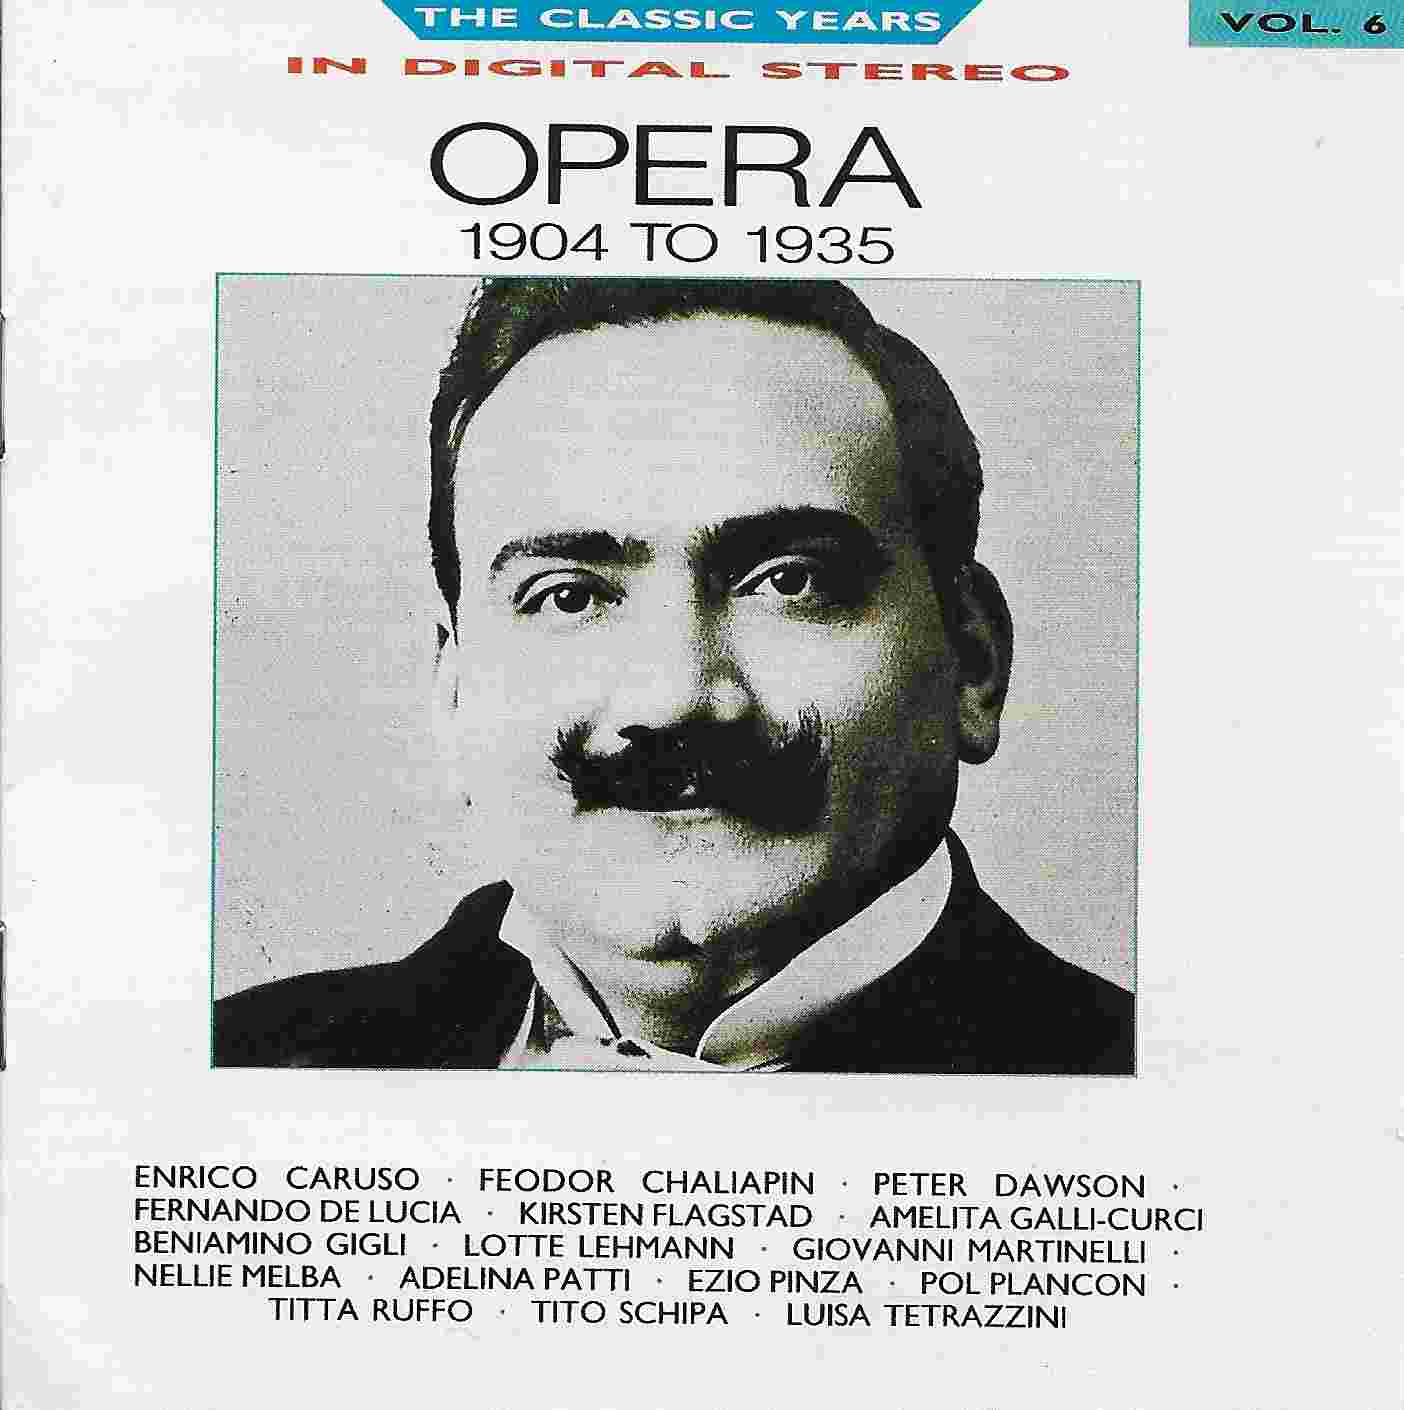 Picture of Classic years - Volume 6, Opera by artist Various from the BBC cds - Records and Tapes library